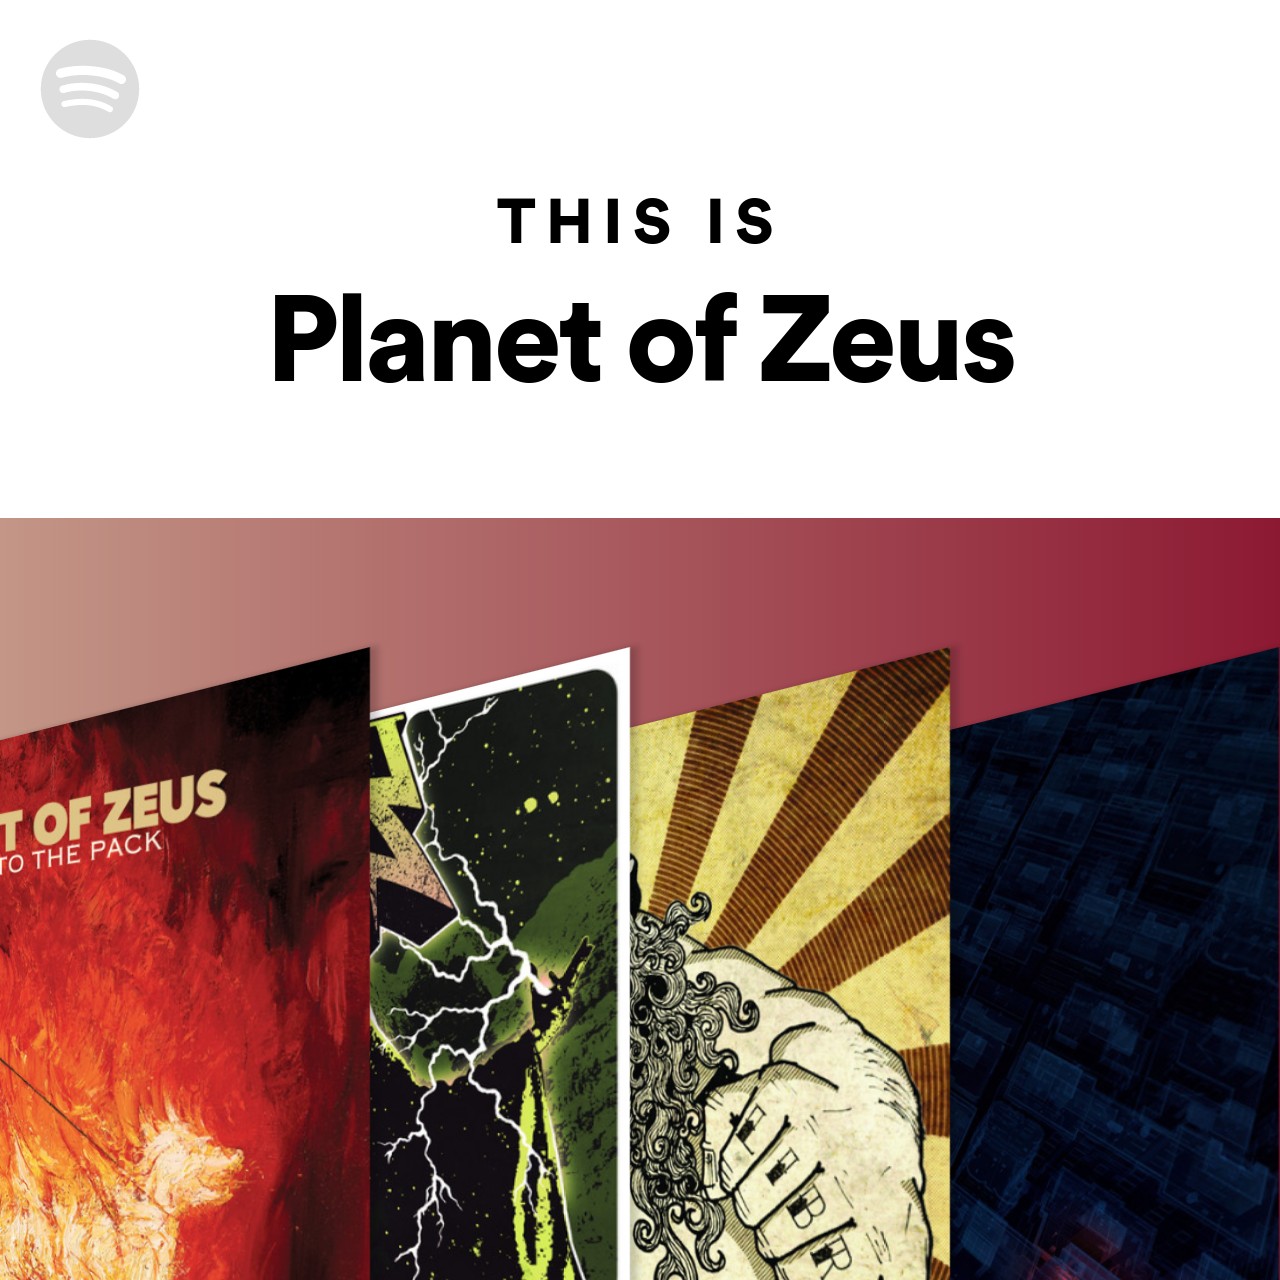 This Is Planet of Zeus